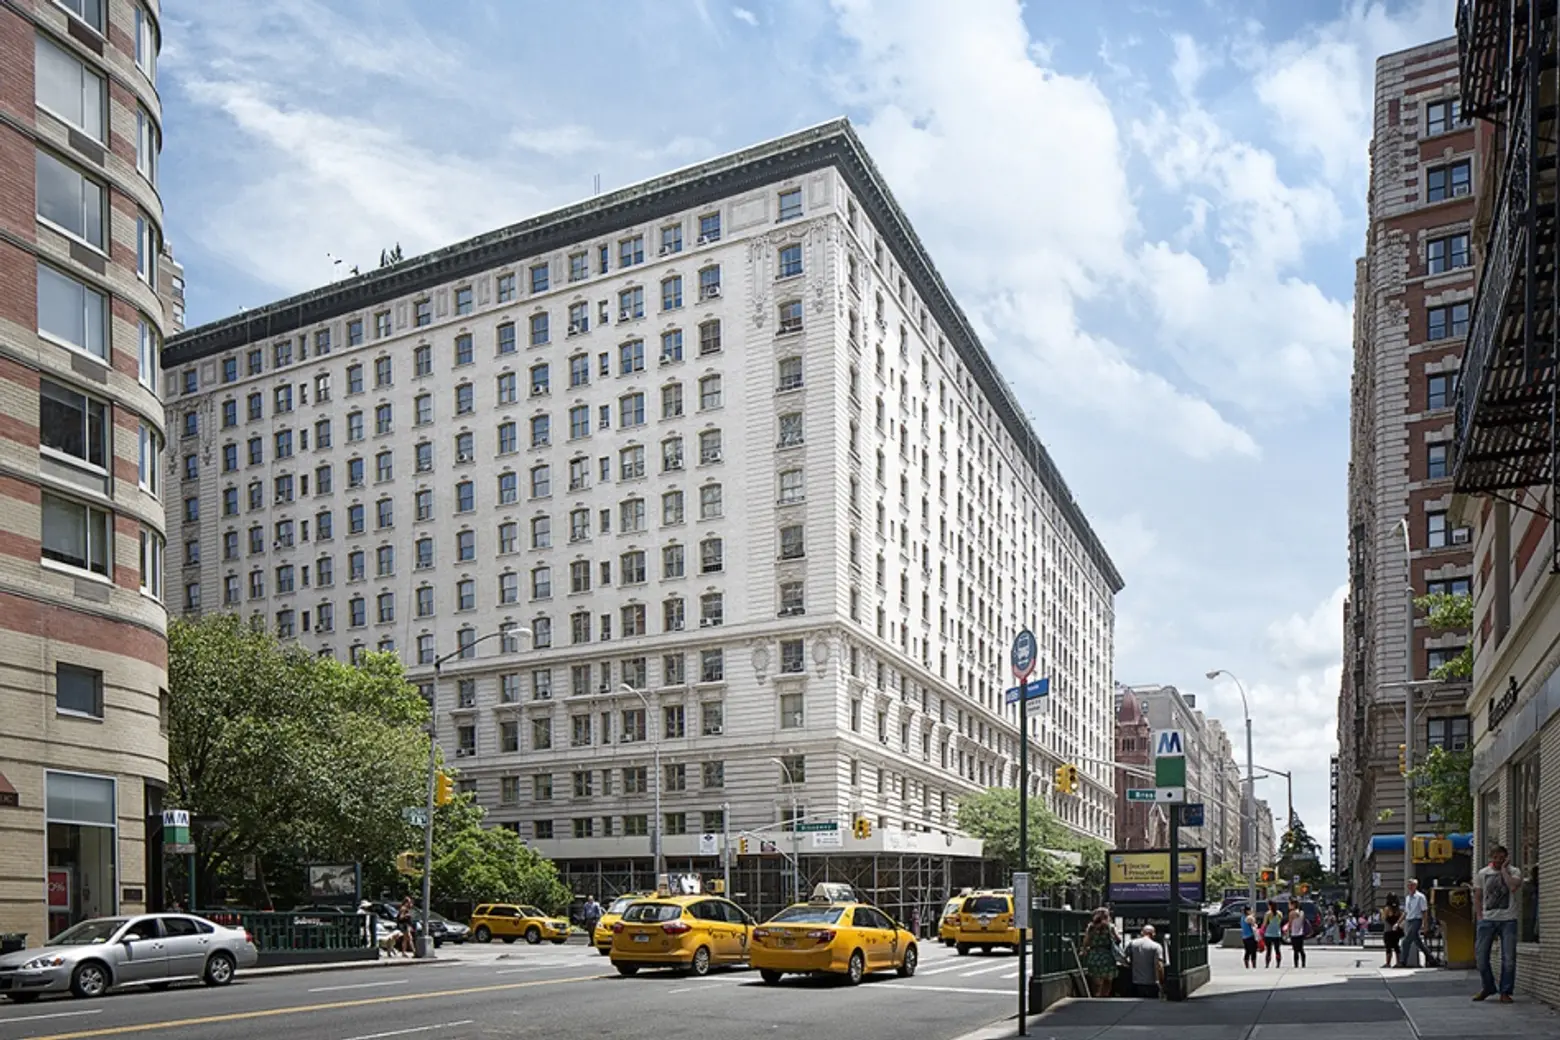 Robert A.M. Stern will lead the transformation of the historic Belnord into condos